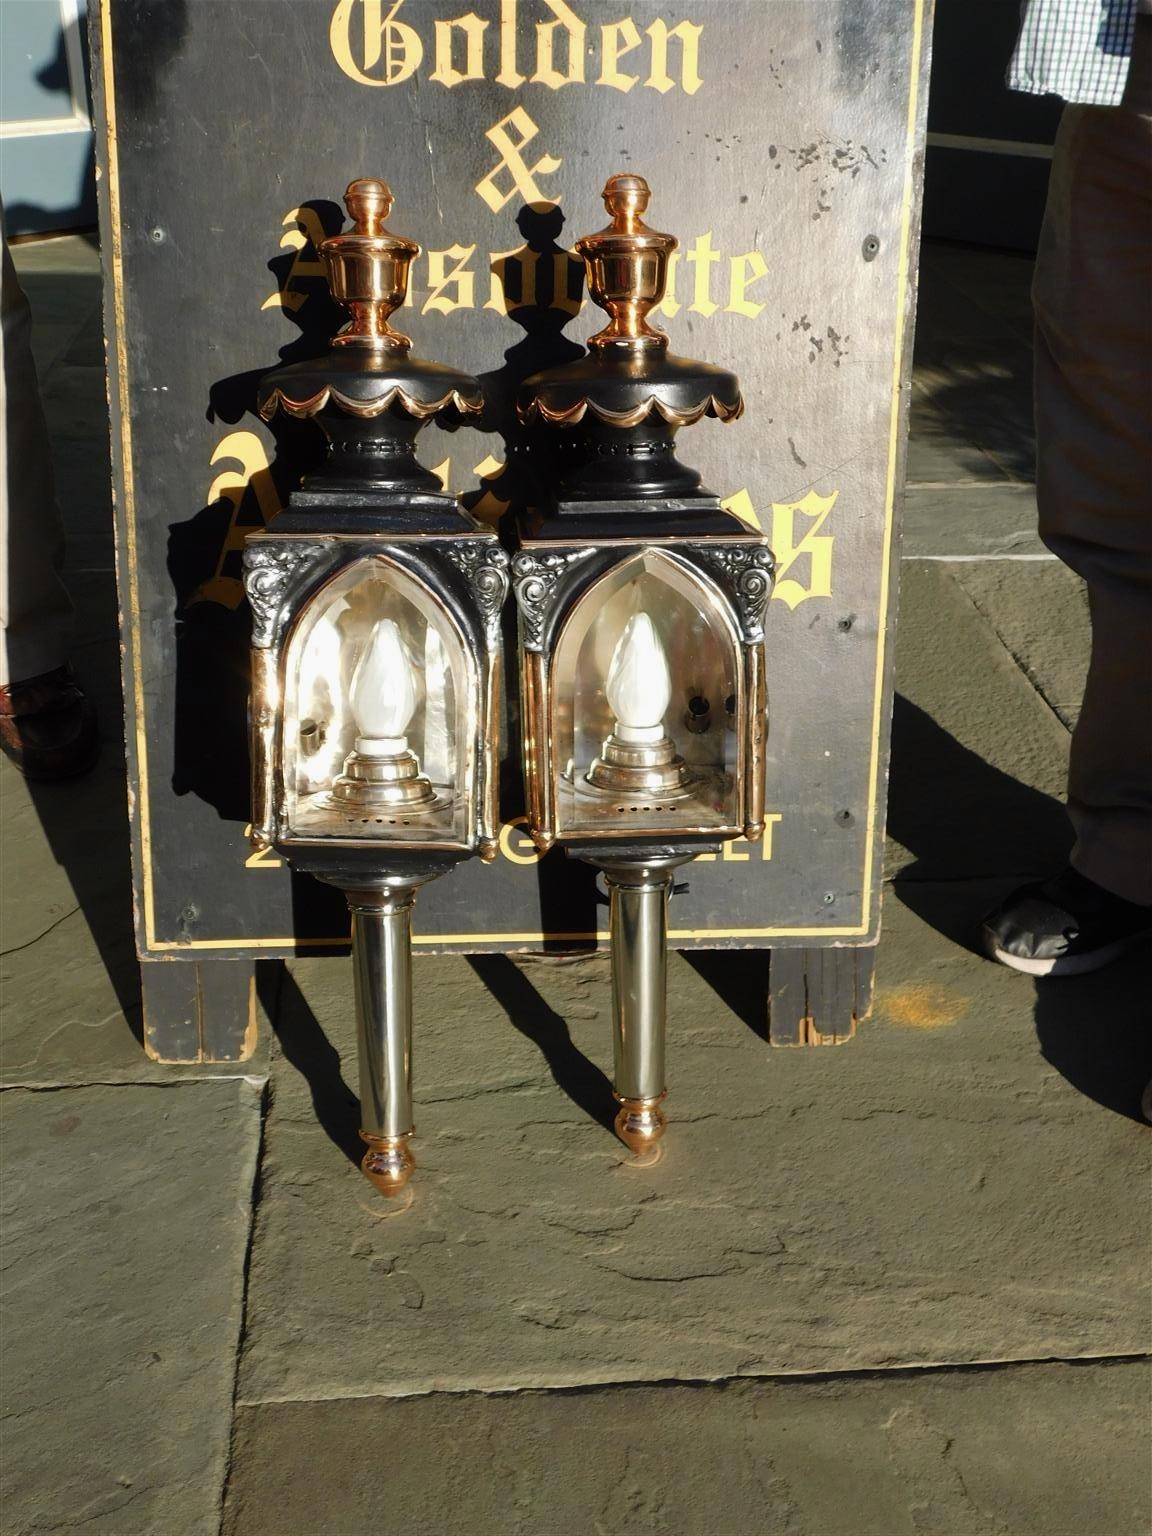 Pair of American nickel silver over copper & brass coach lanterns with urn finials, floral swag motif, and resting on a turned bulbous tapered ringed reservoir. Coach lanterns have the original beveled glass and are signed by the maker James